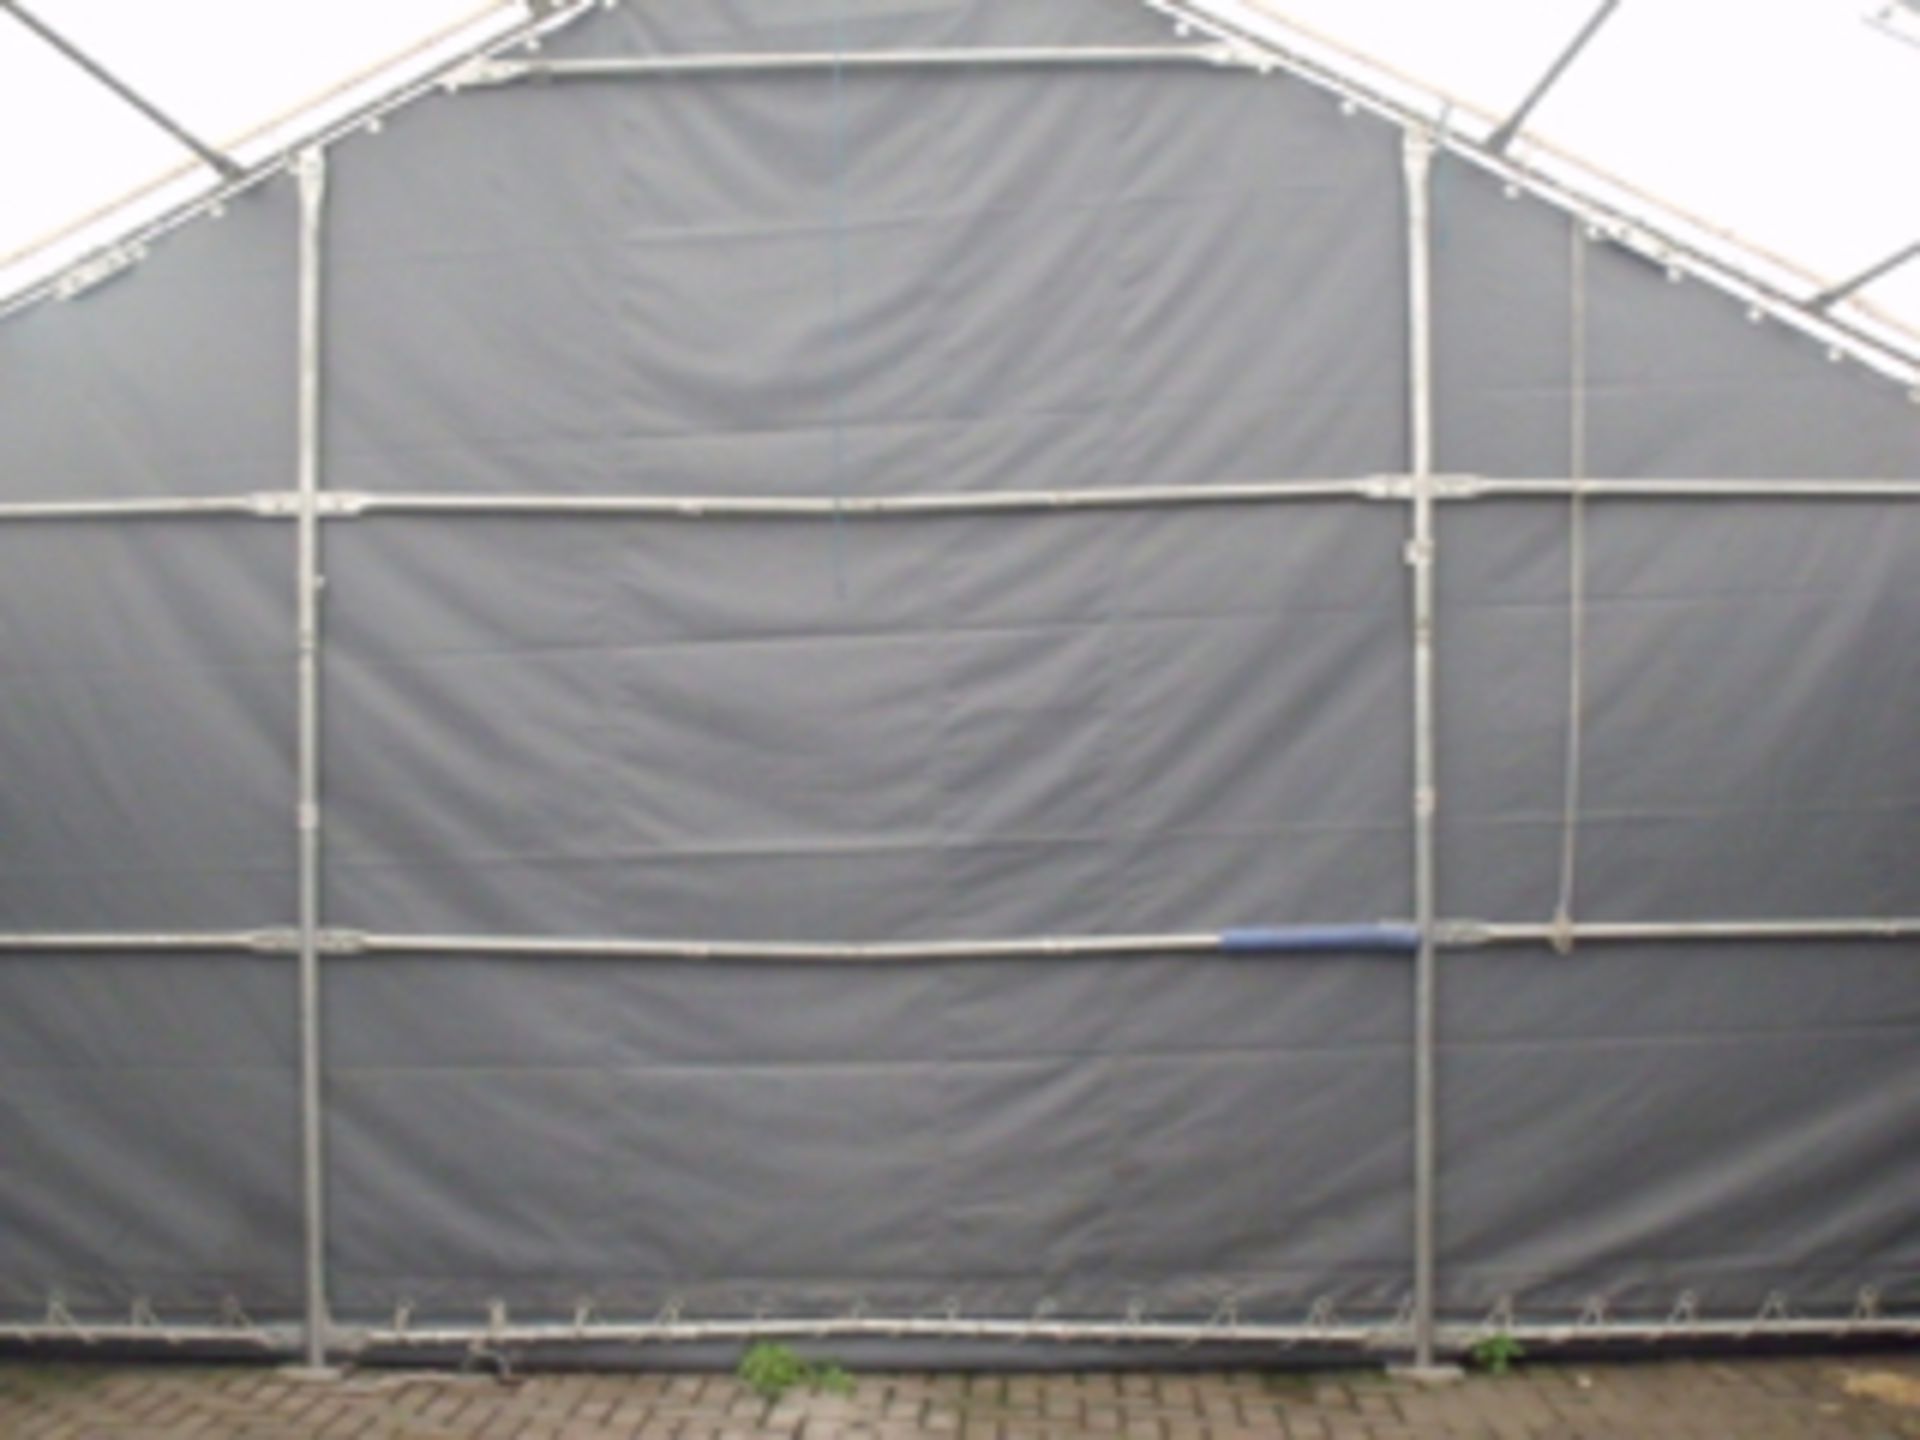 Dancover Professional Storage shelter 7x7x2.5x4.2 m Titanium used but in very good condition - Image 5 of 6